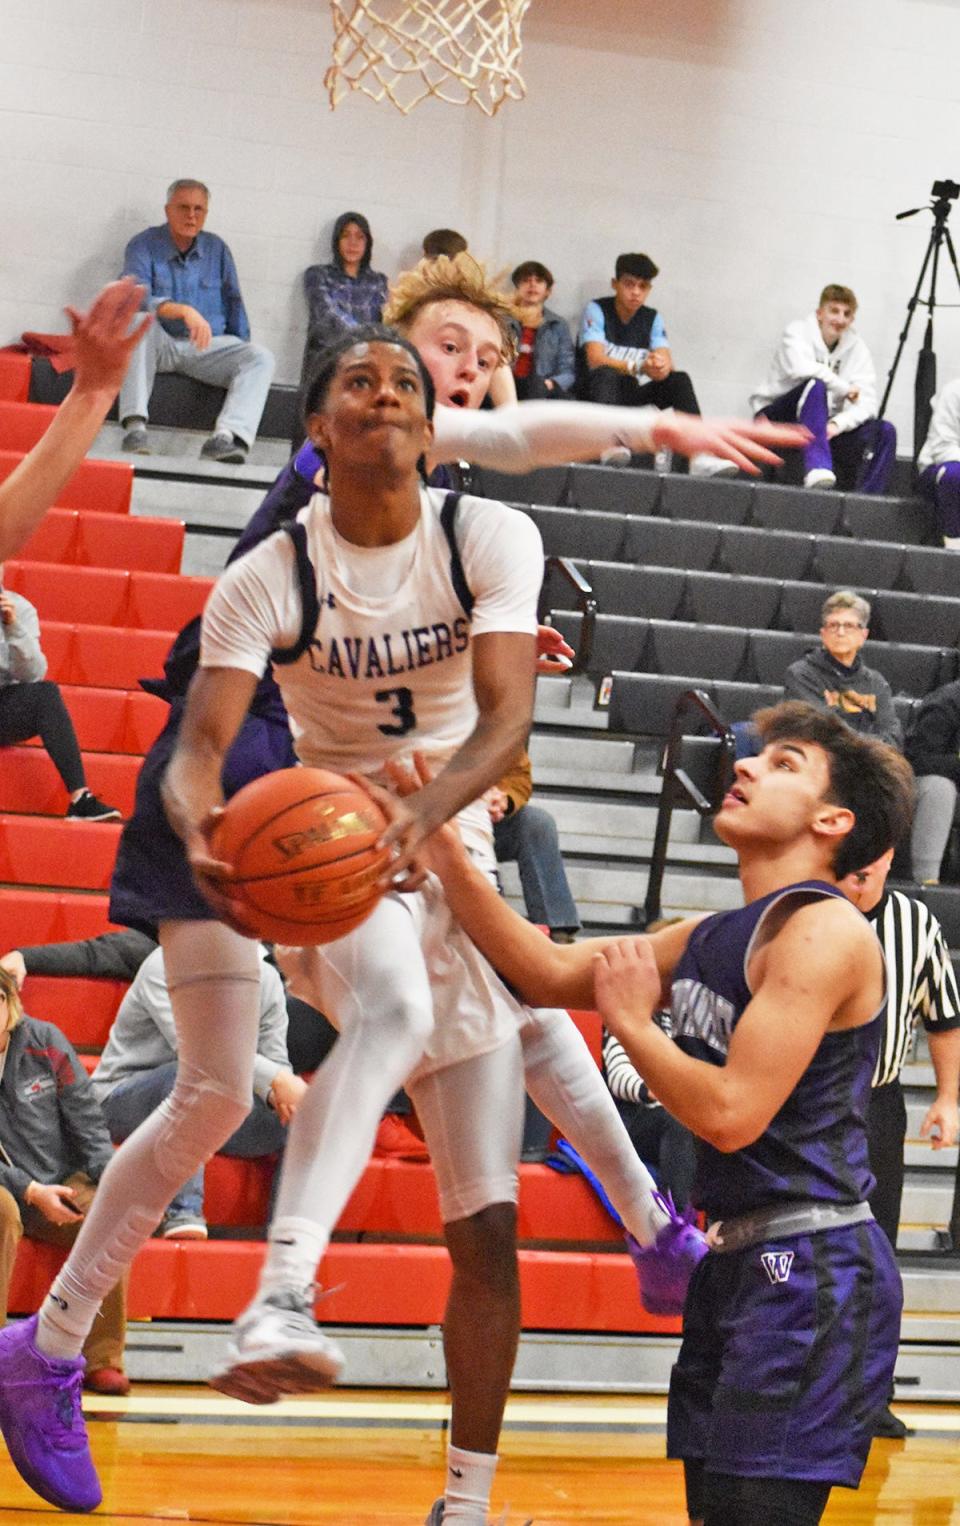 Logan Santos (3) of East Stroudsburg South slices through the Wallenpaupack Area defense on his way to an acrobatic basket. Santos was named to the All-Tournament Team by the Honesdale Area Jaycees Committee.